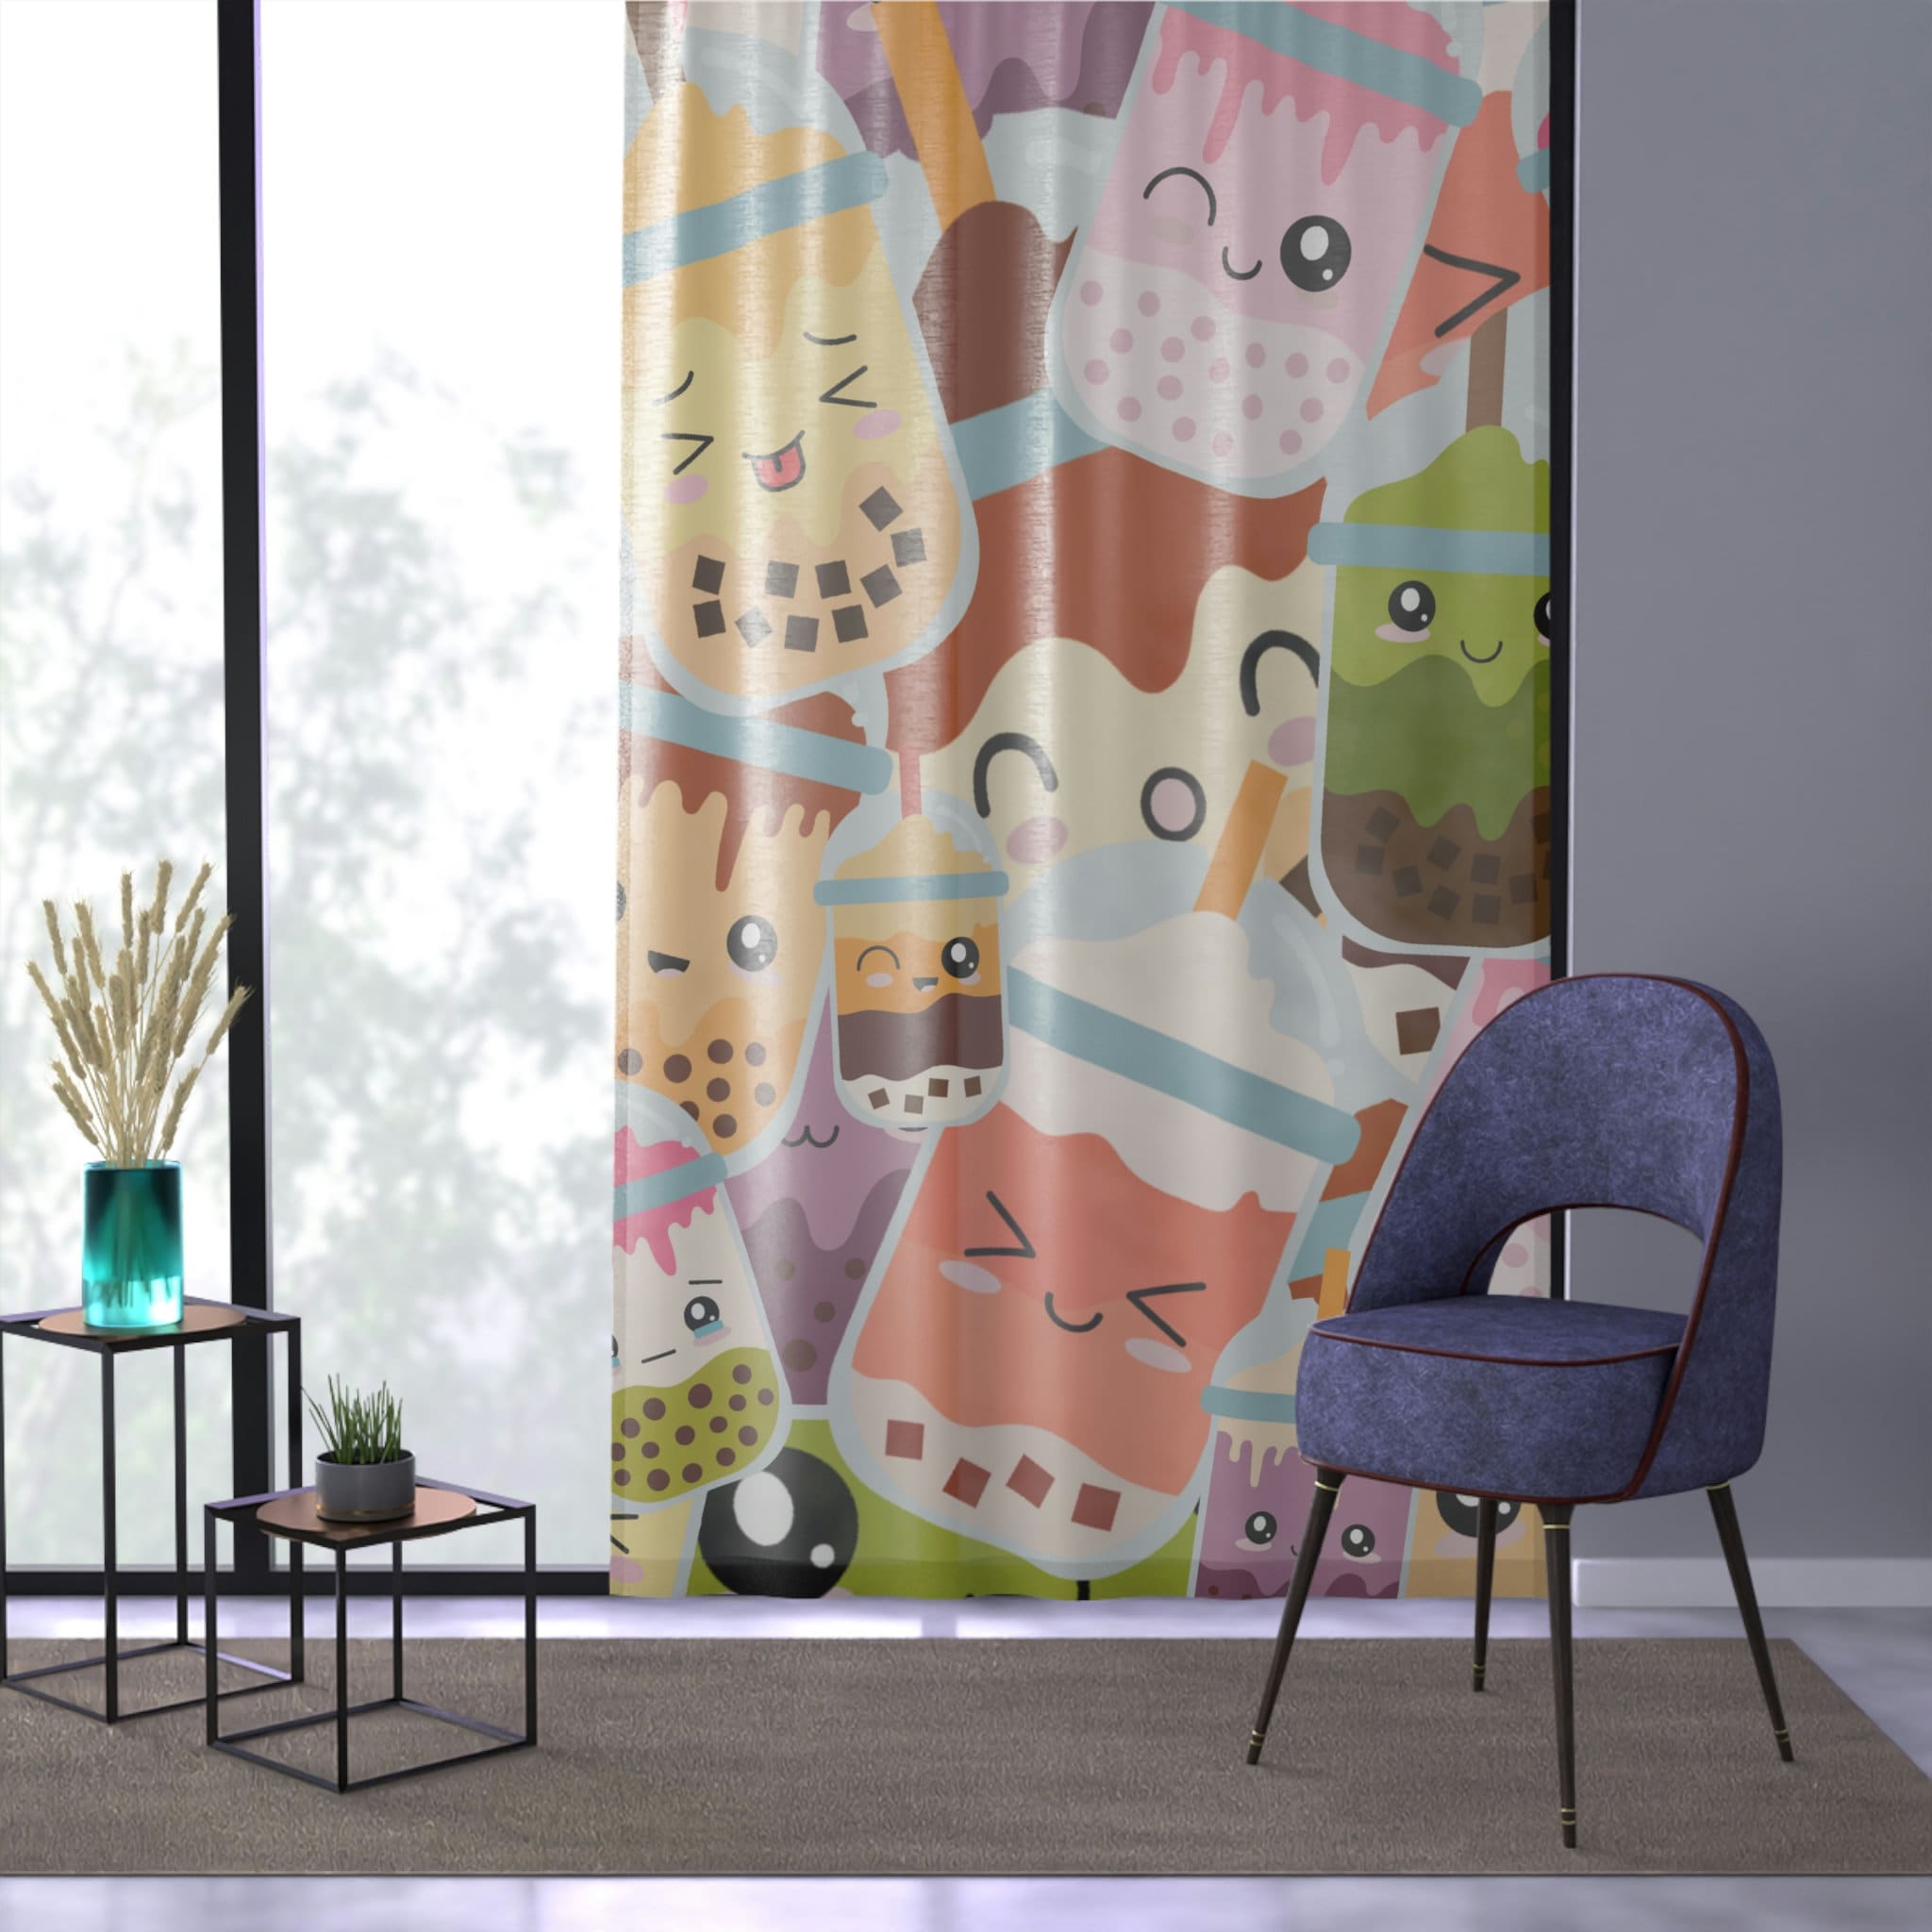 Anime Shower Curtains for Sale | Redbubble